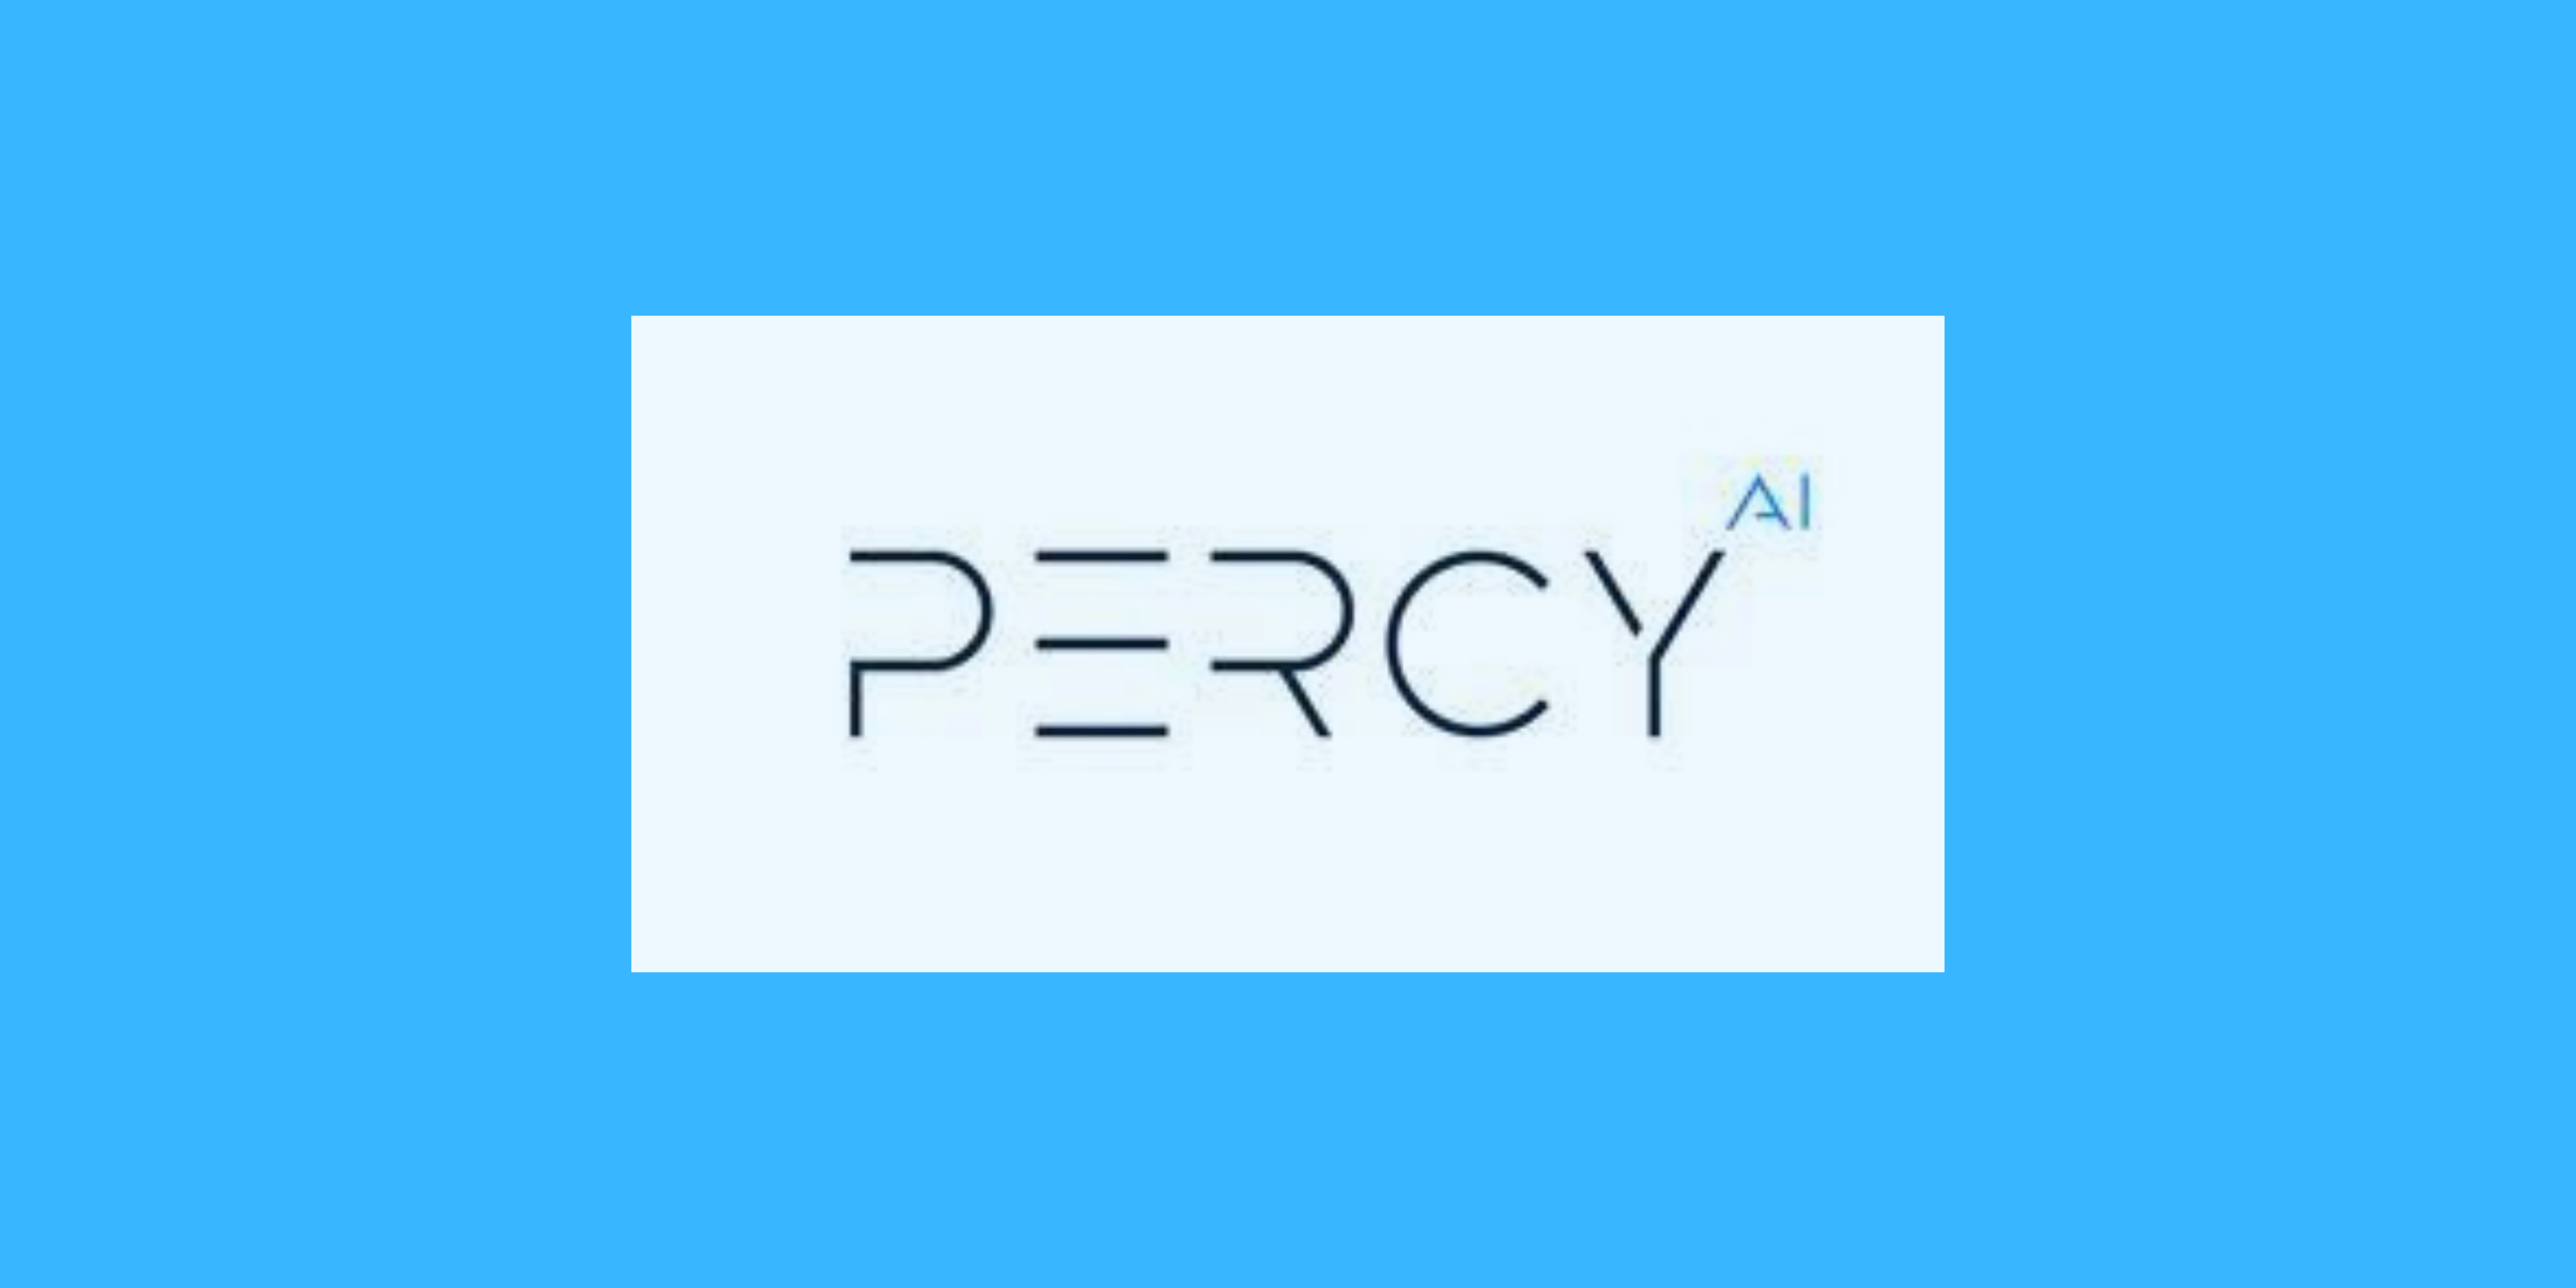 Buyside Rebrands To ‘Percy’ After $10M Funding Round